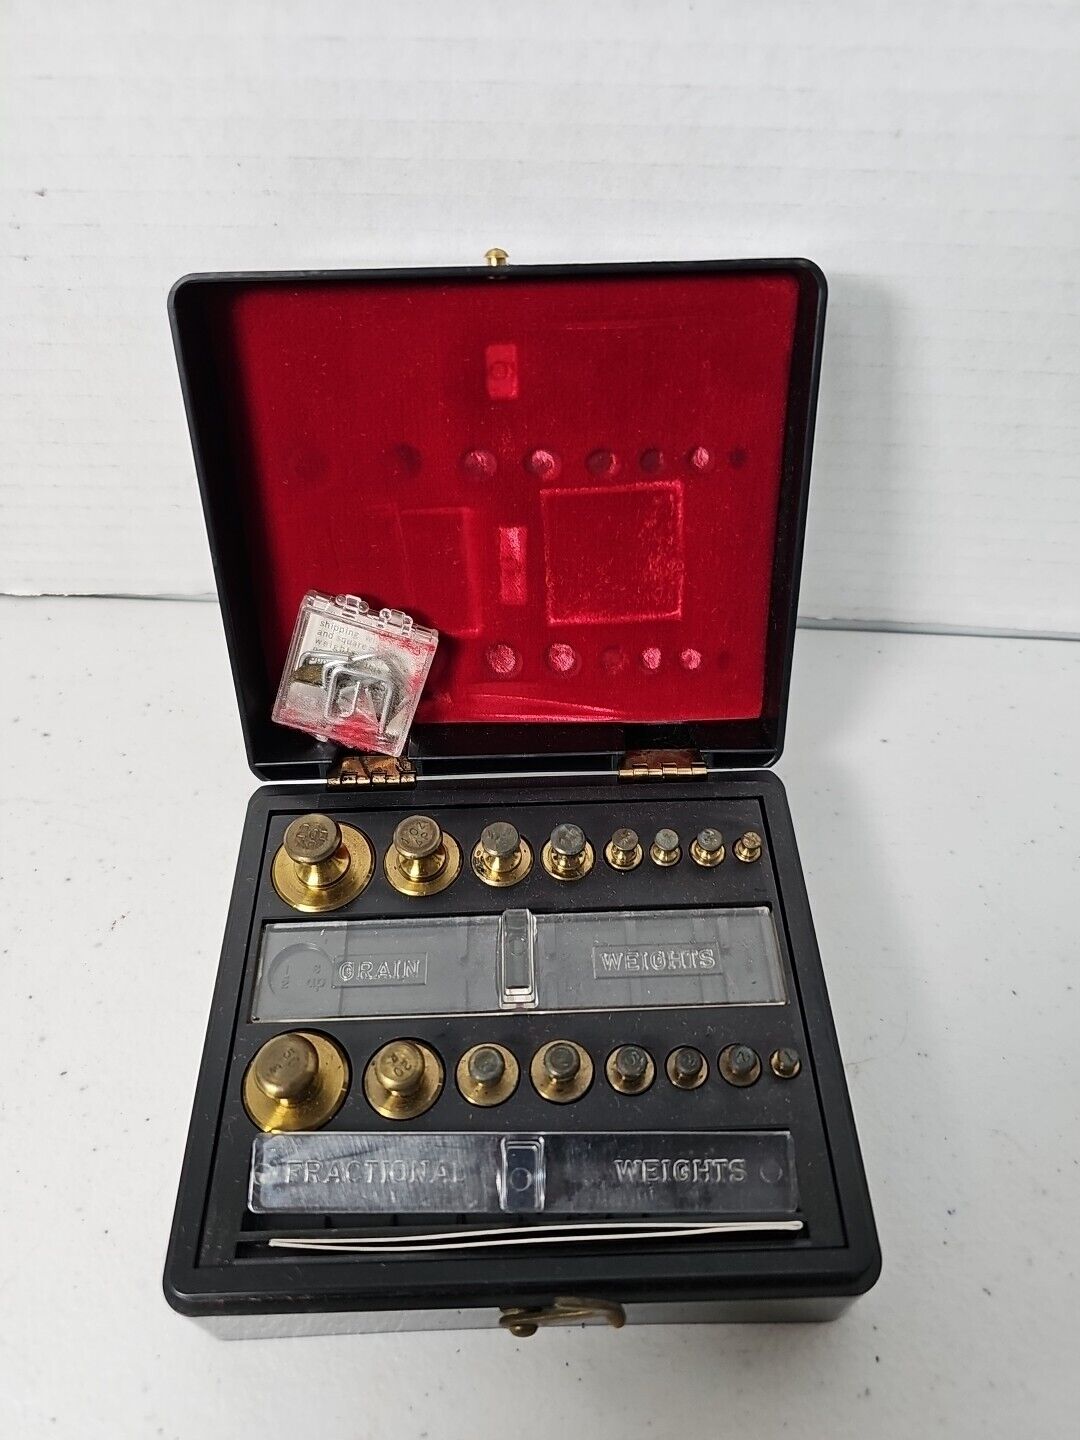 Vintage Ohaus APOTHECARY Pharmacist Weight Set #5601